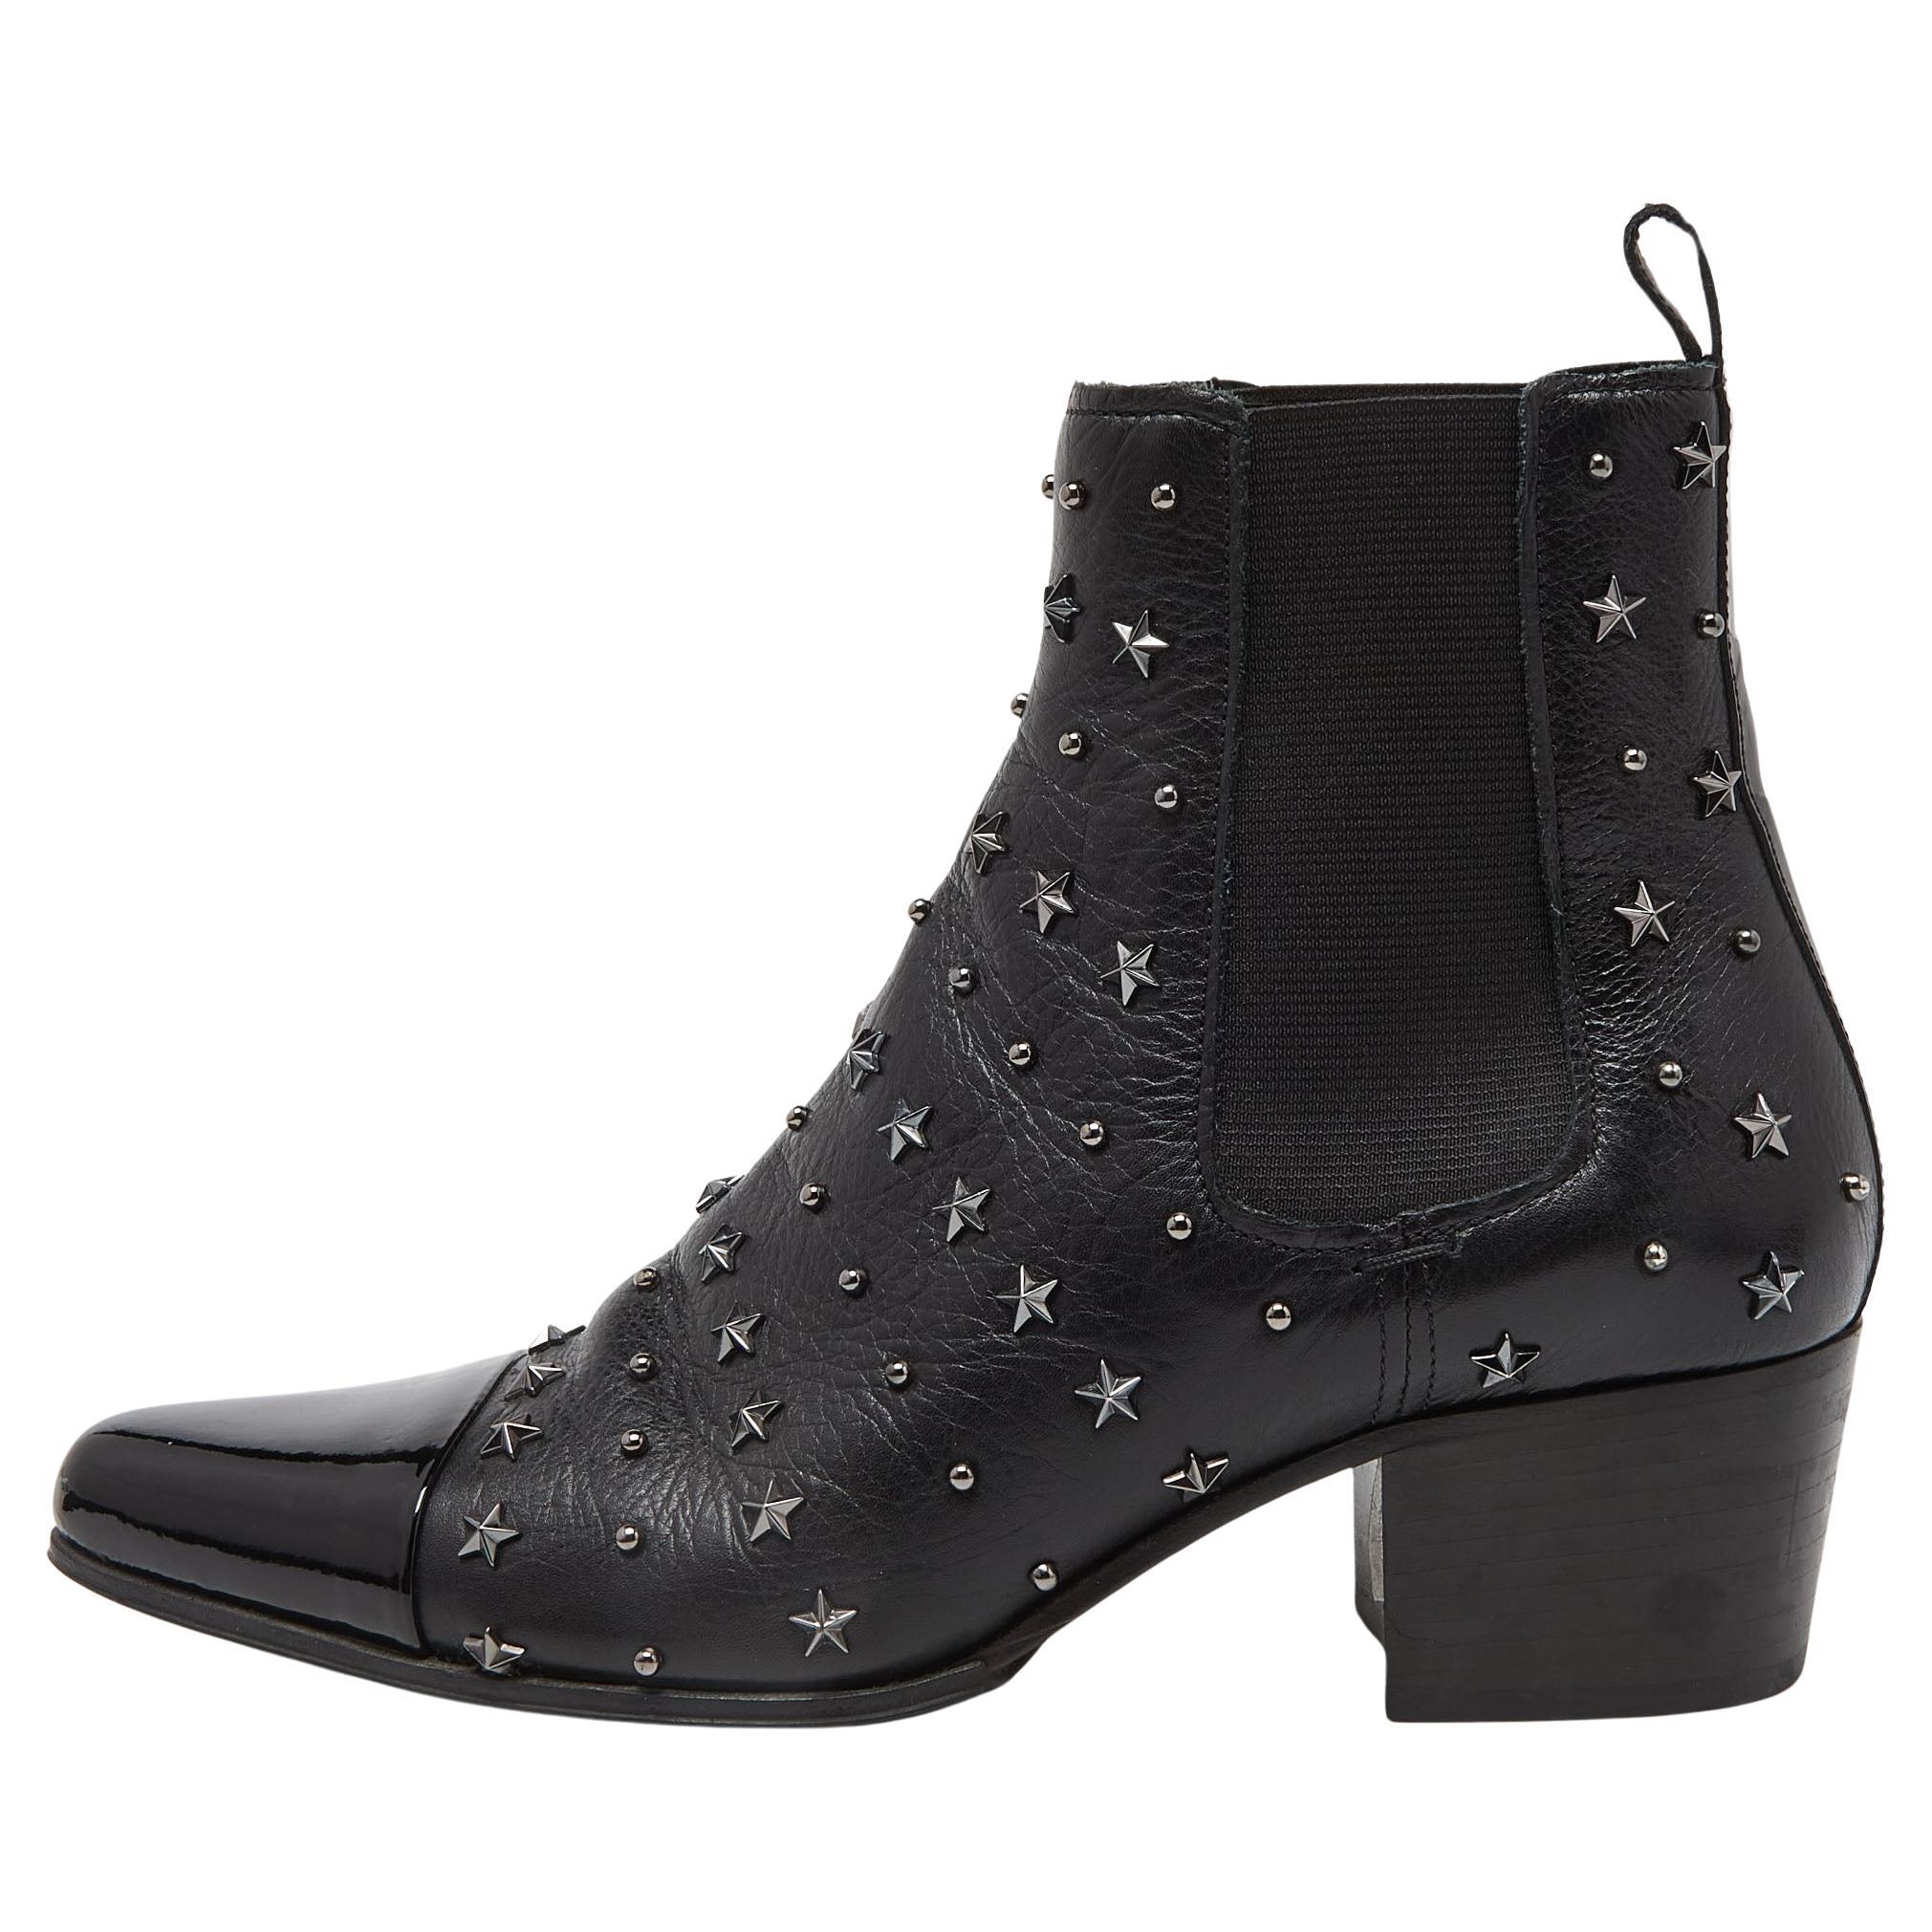 Balmain Black Leather and Patent Studded Ankle Boots Size 39 For Sale